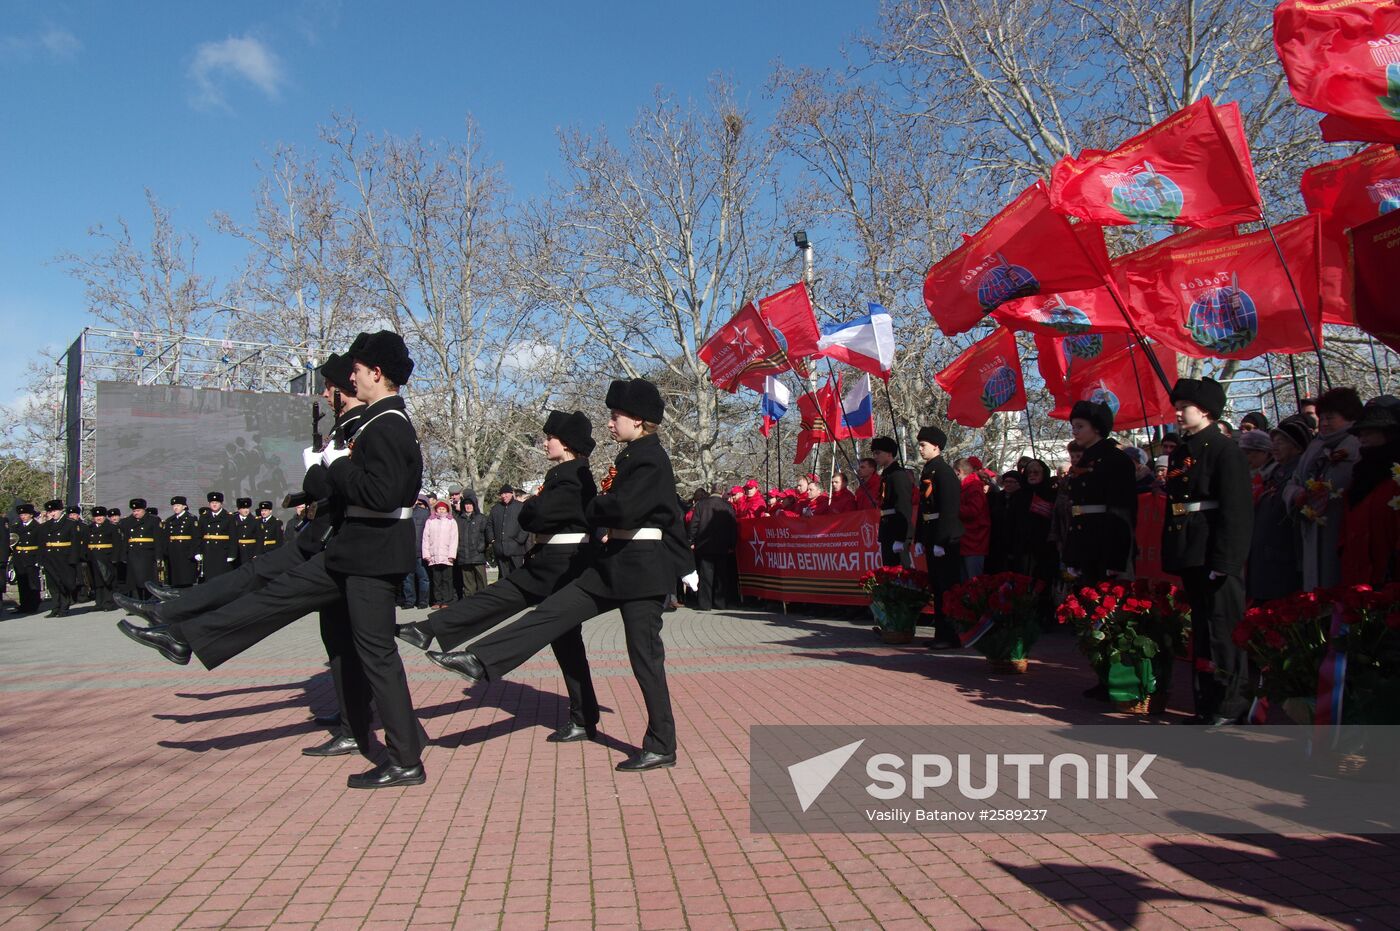 The auto rally "Our Great Victory" roars off in Sevastopol